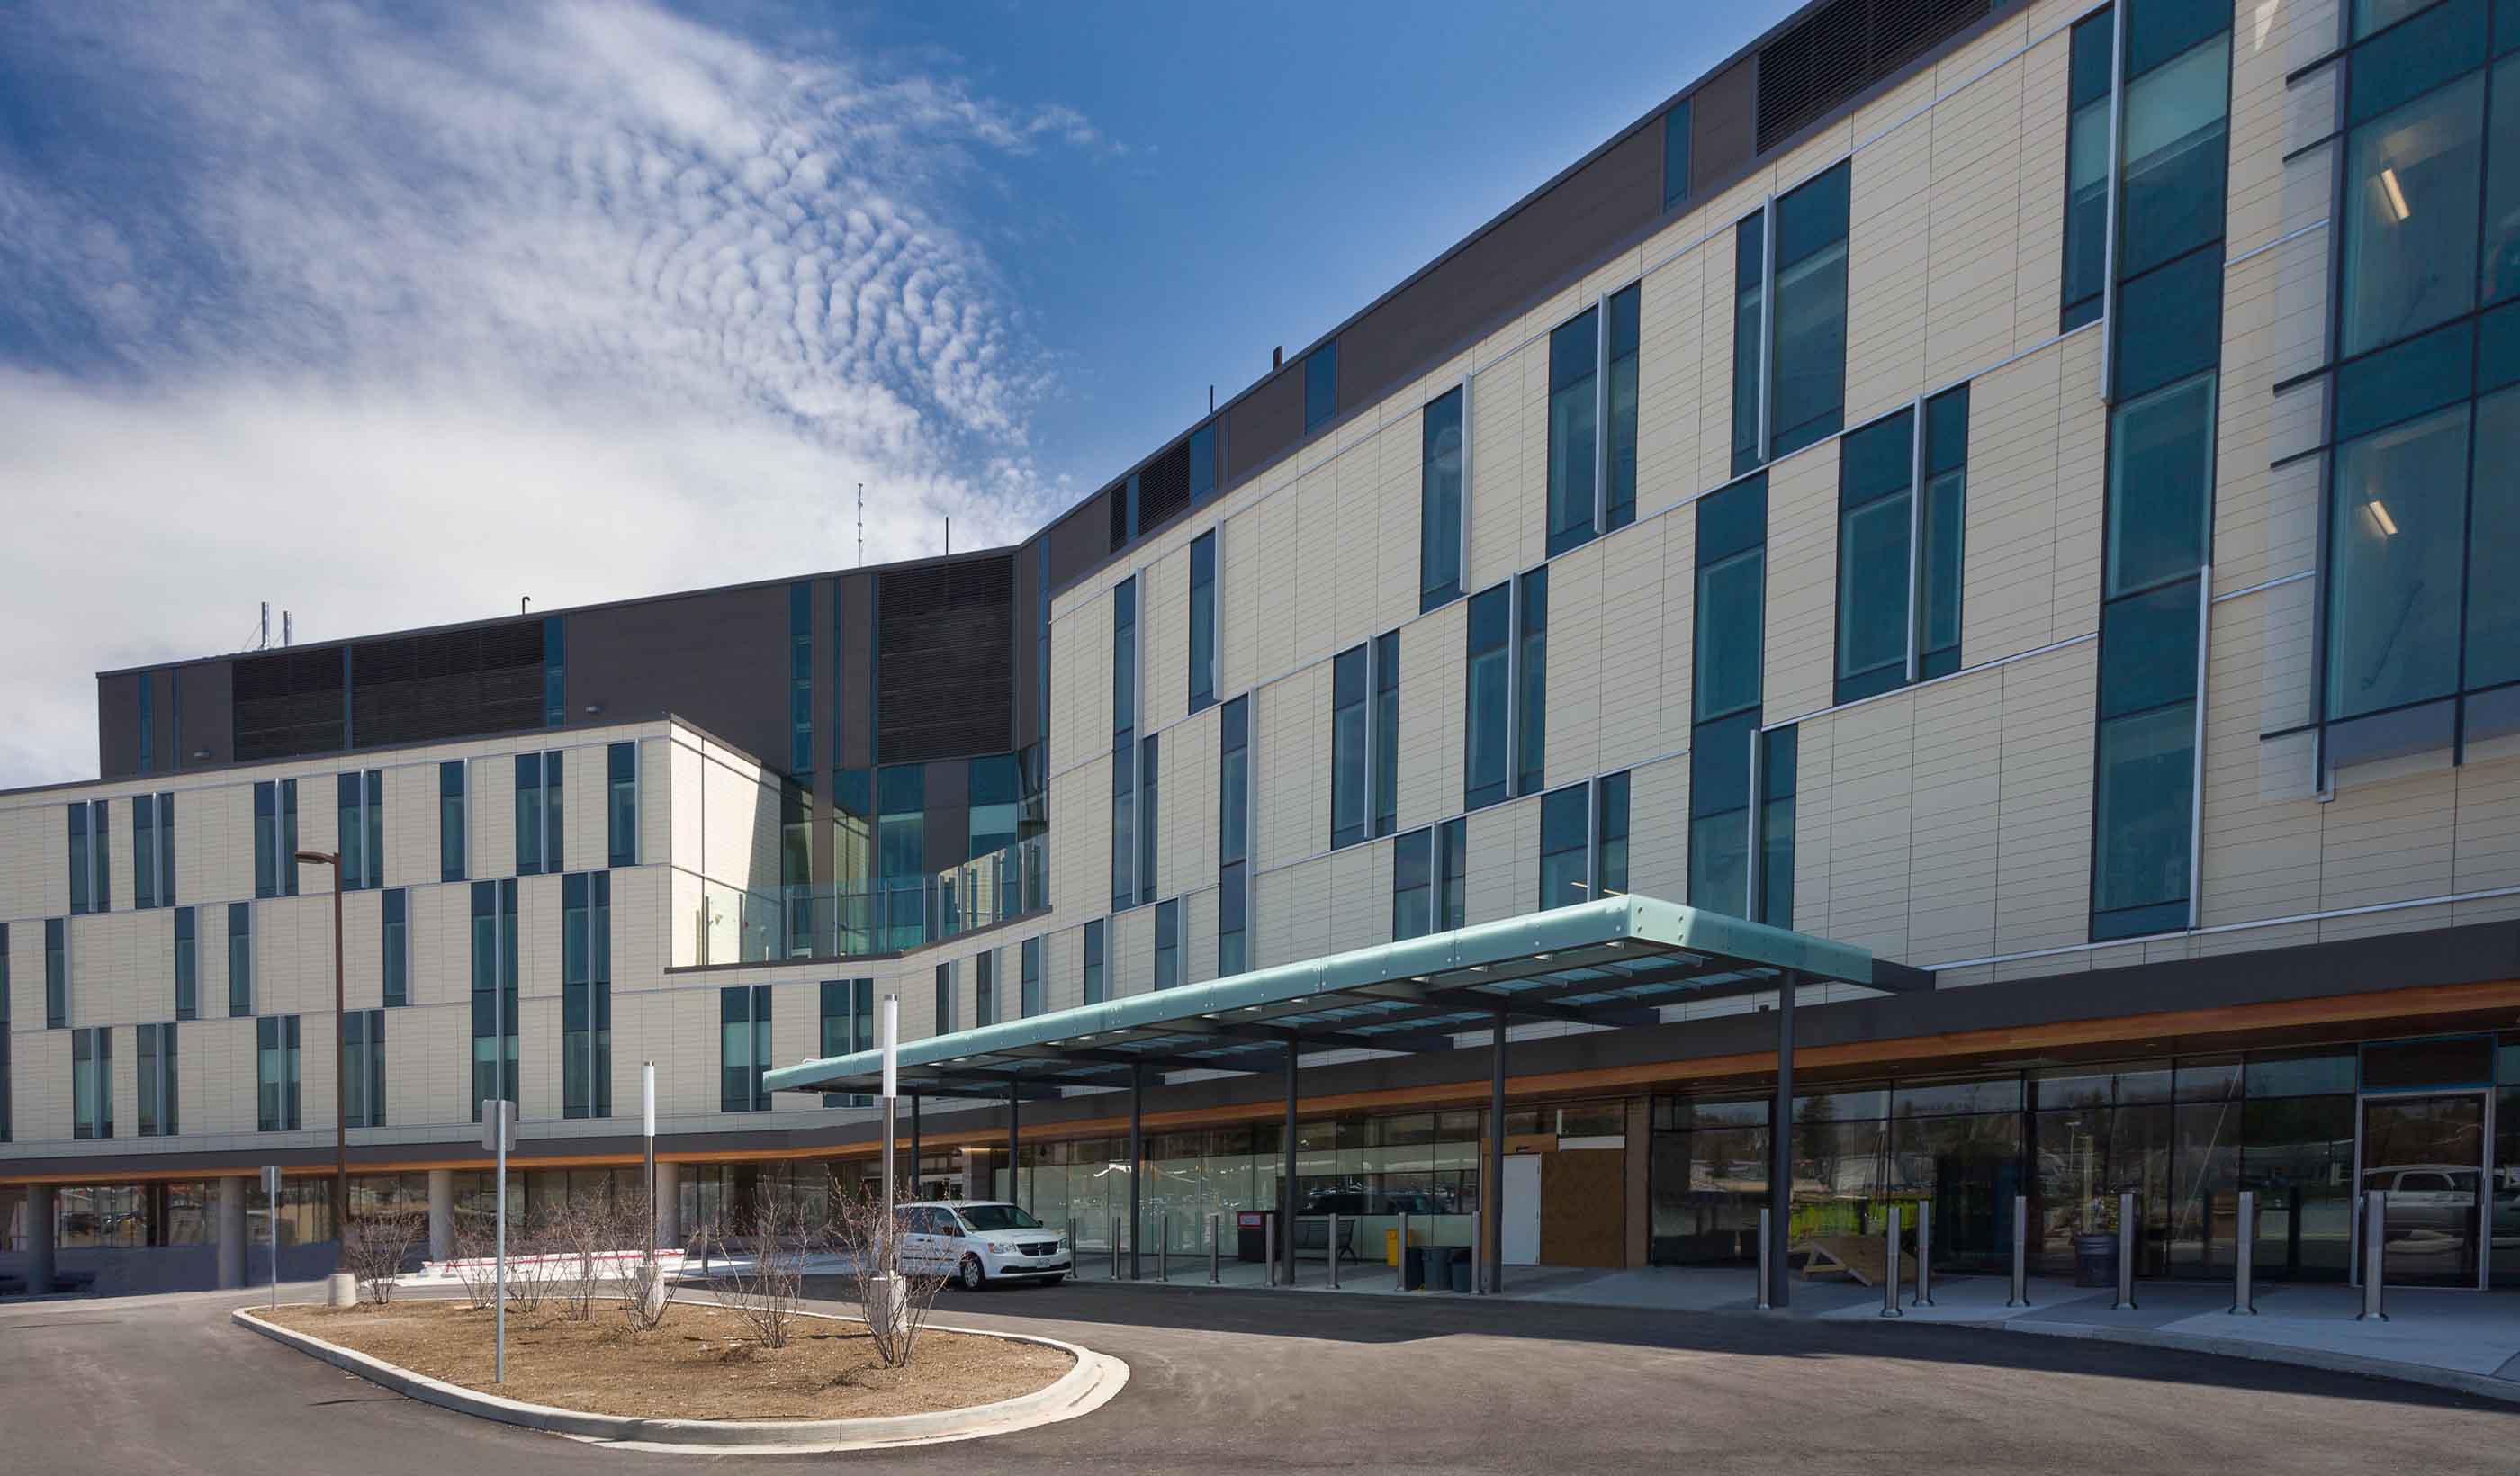 A hospital that feels like home: Community as inspiration in healthcare design